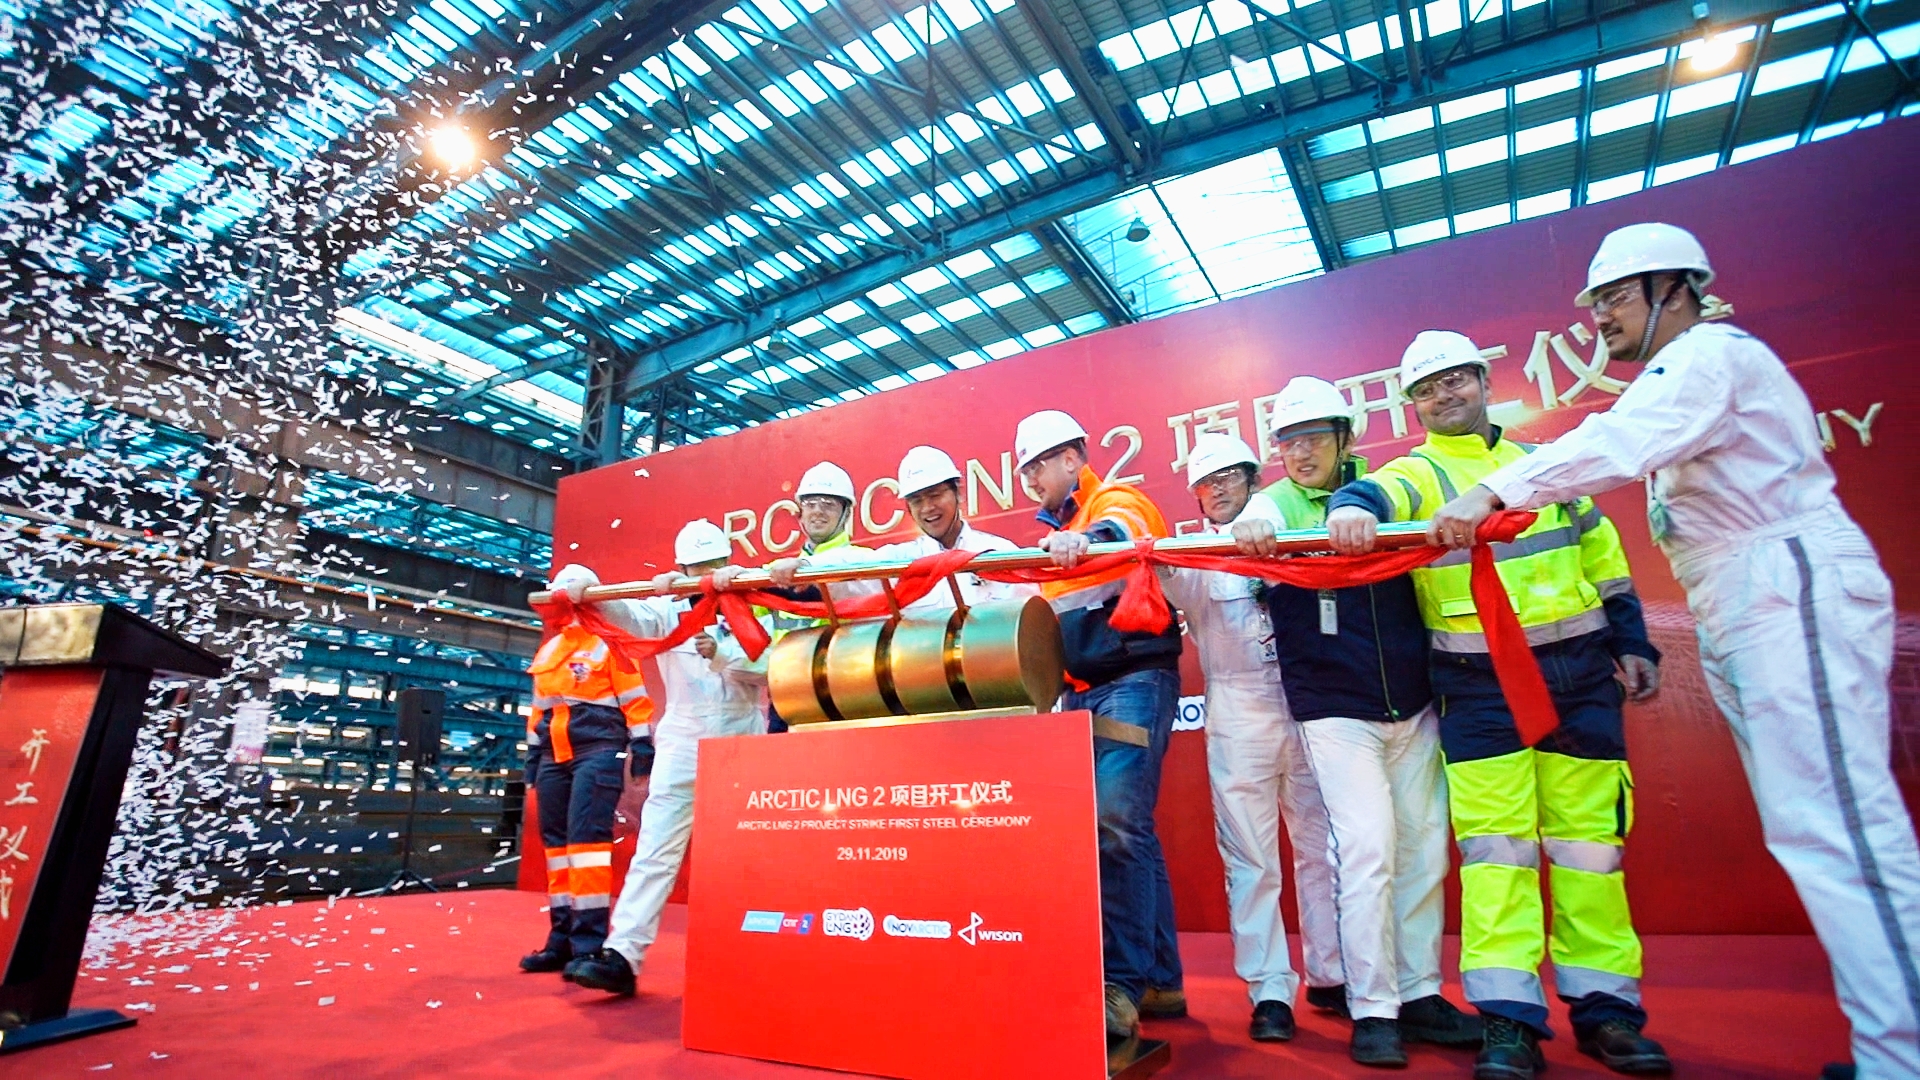 Wison Offshore & Marine announced the formal commencement of Arctic LNG2 project in Zhoushan Yard